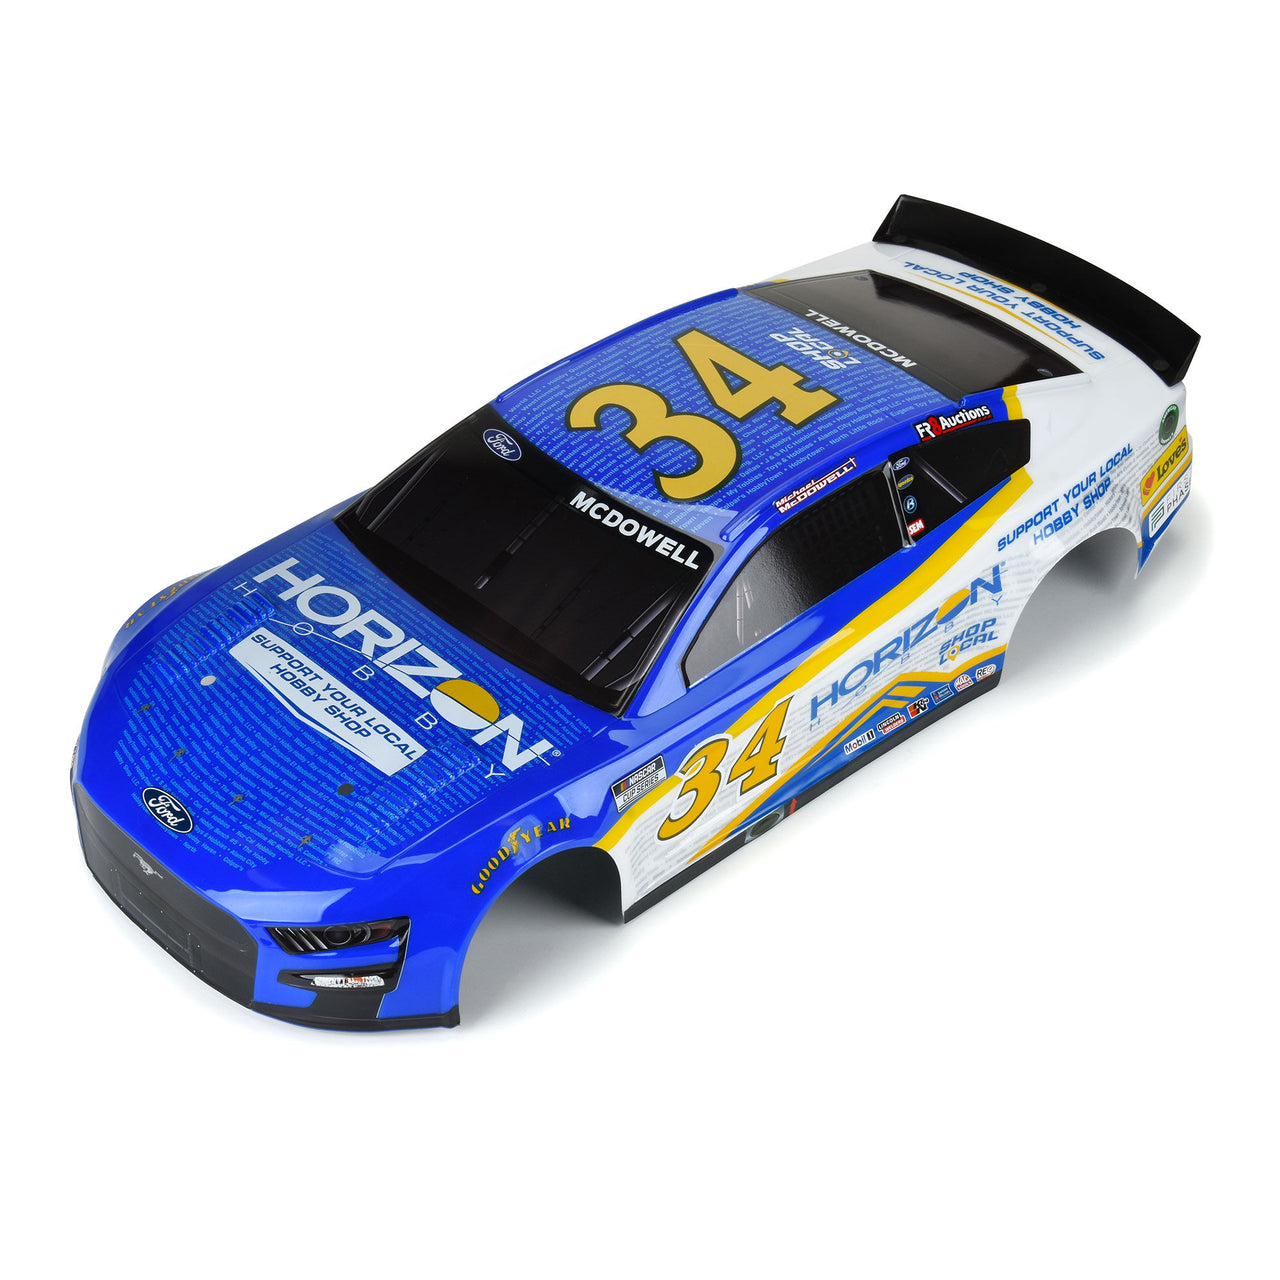 ARA410017 Limited Edition No.34 Ford Mustang NASCAR Cup Series Body: INFRACTION 6S